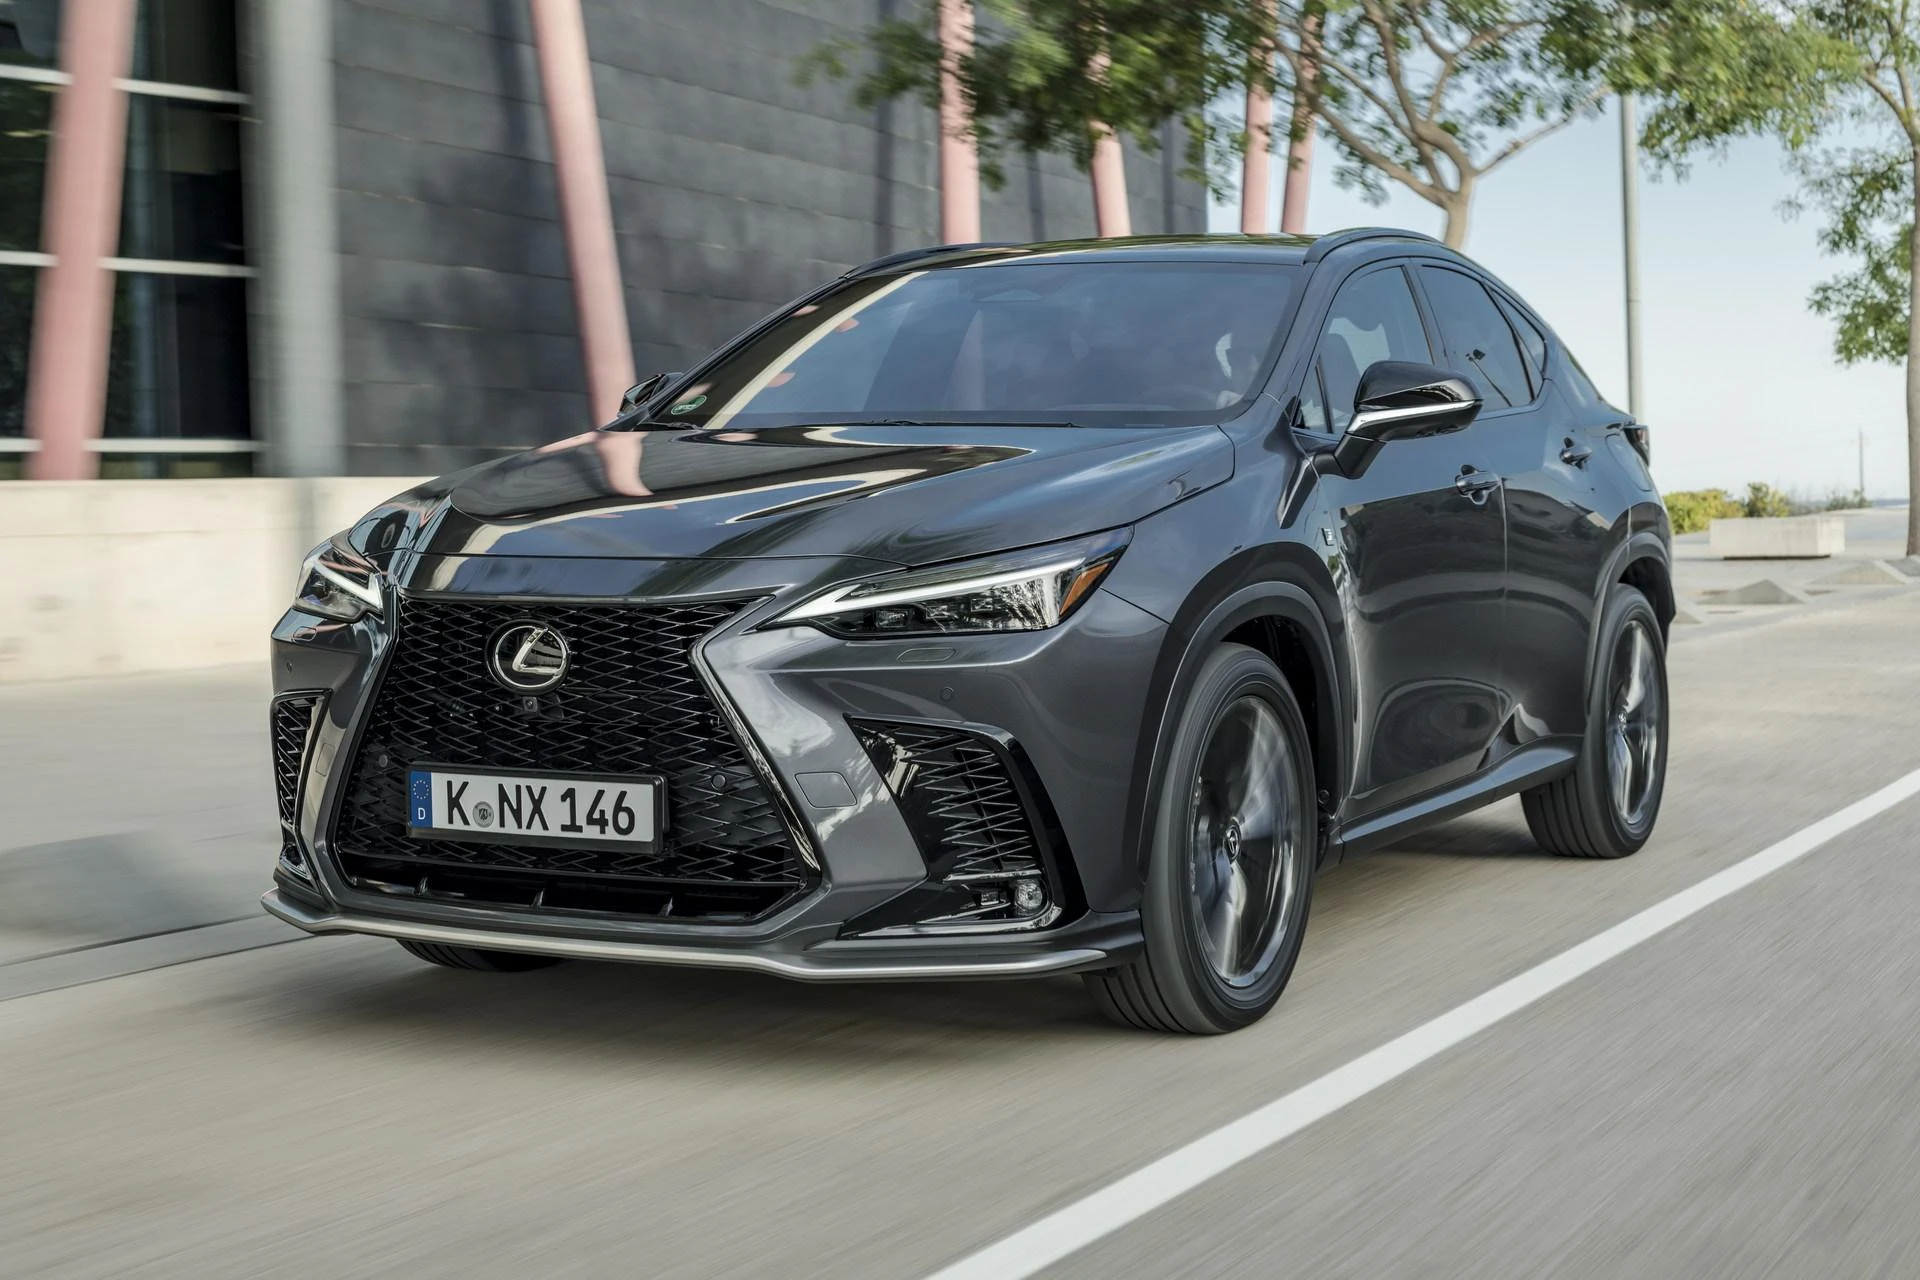 bao john wick surprised everyone by giving lance reddick a lexus nx as a thank you for his recent support 653d71522e3d3 John Wick Surprised Everyone By Giving Lance Reddick A Lexus Nx300 As A Thank-you For His Recent Support.